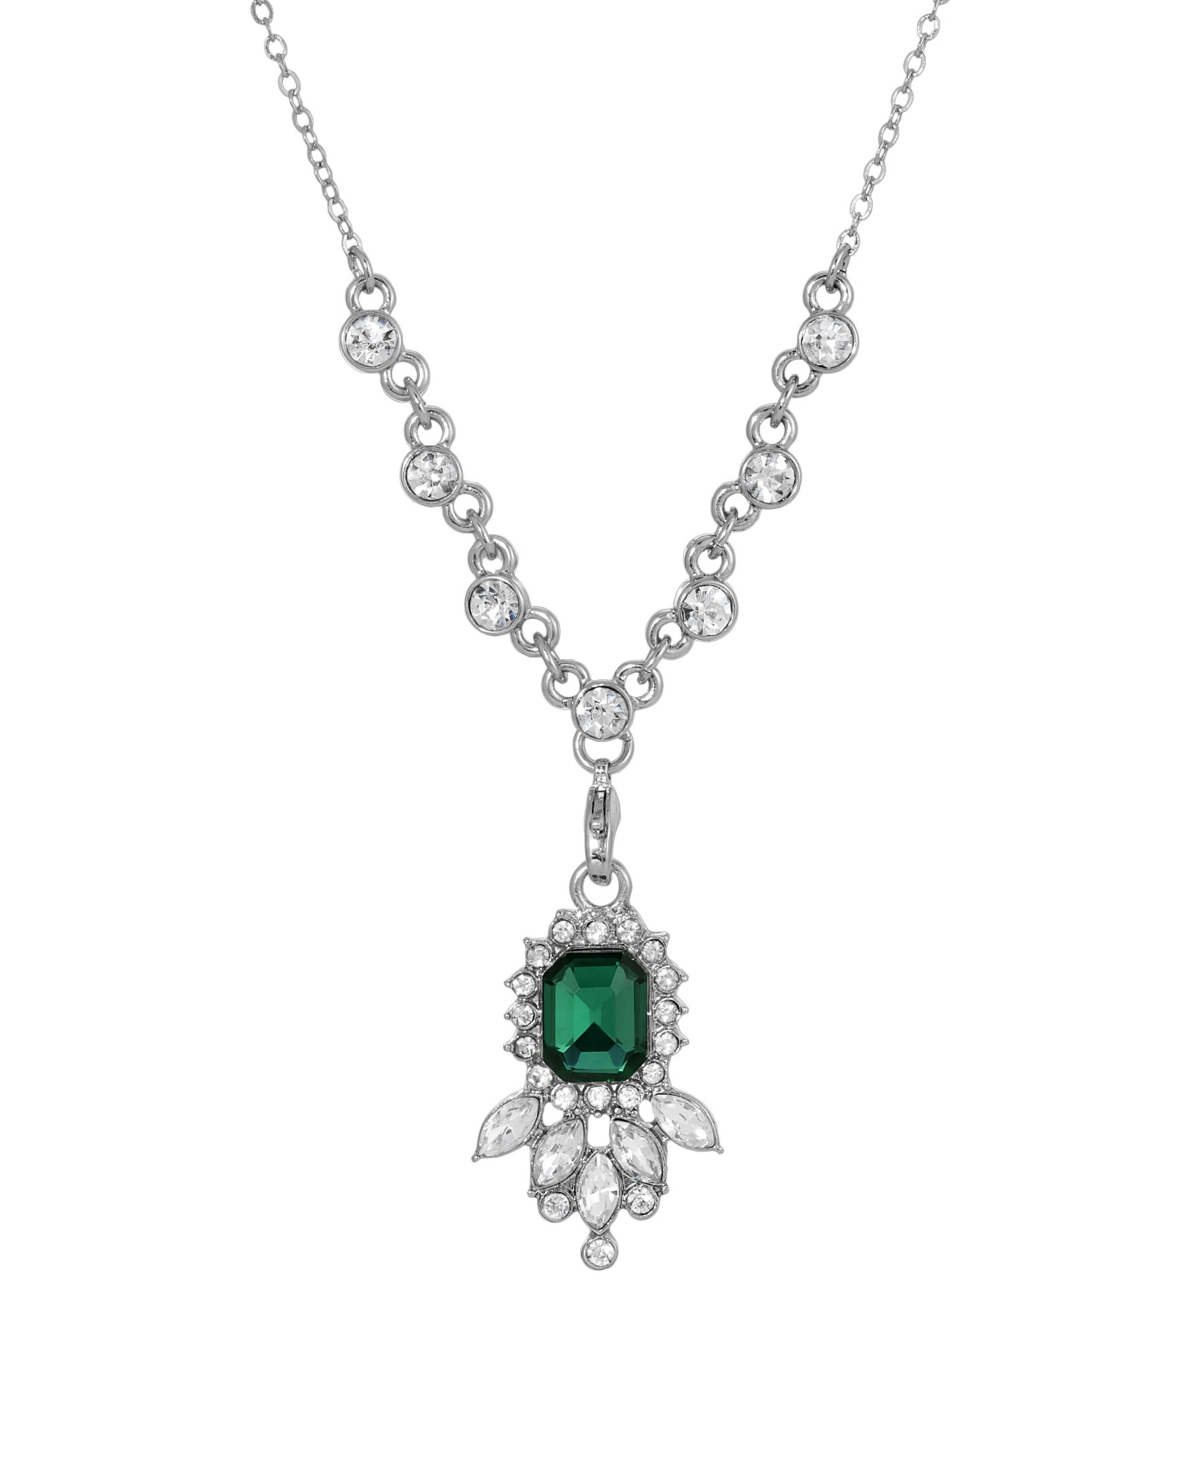 2028 Women's Silver Tone Green And Crystal Pendant Necklace